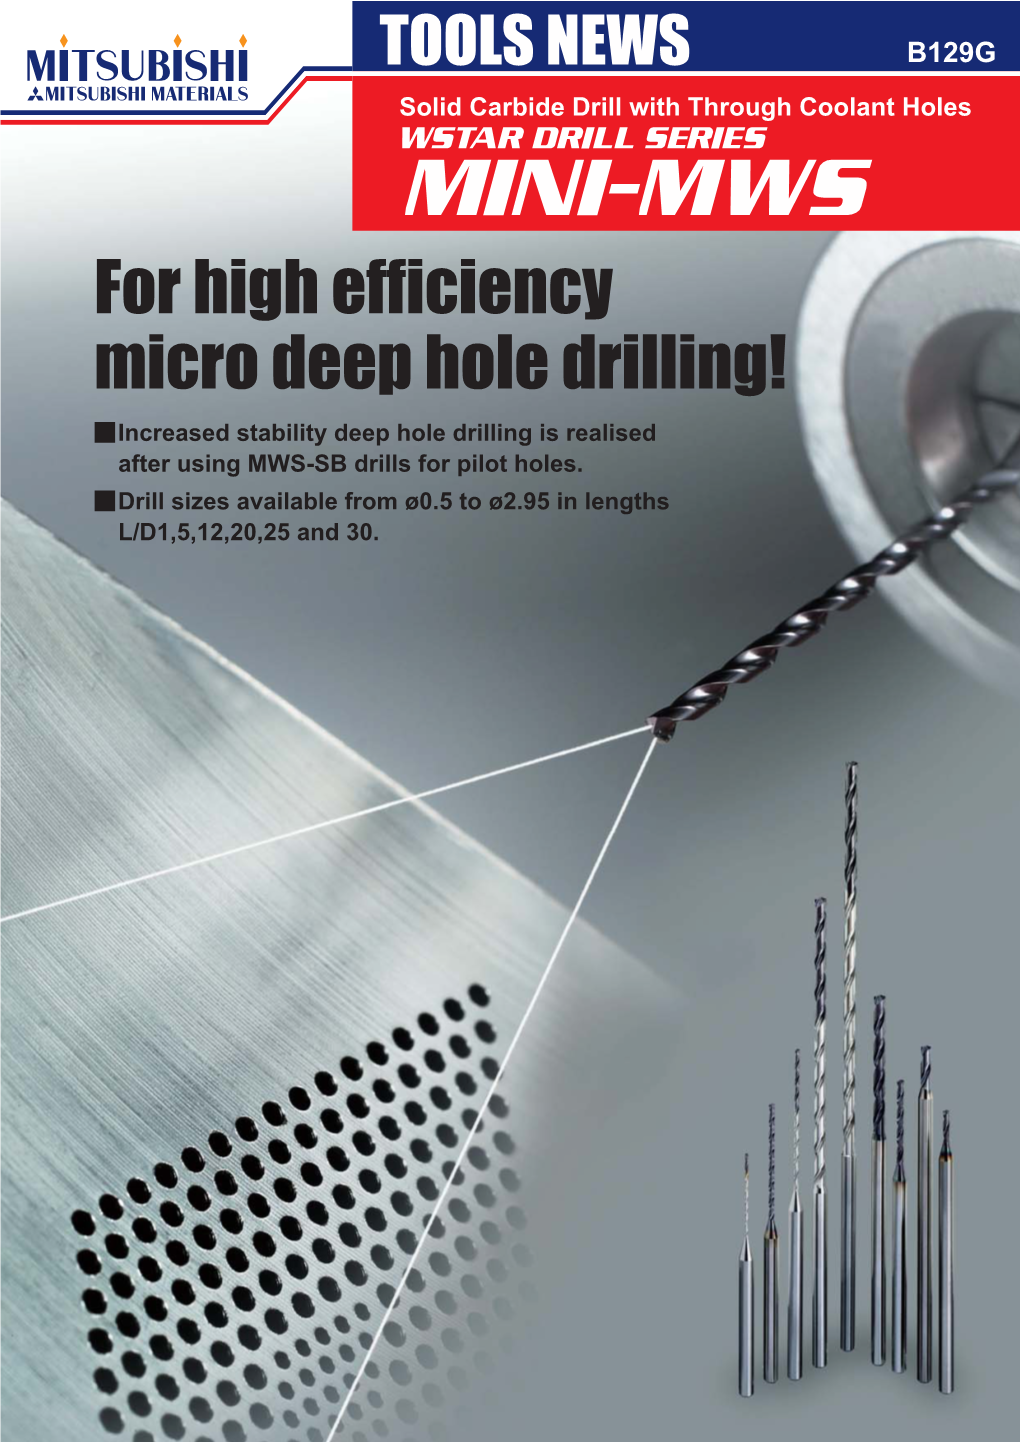 MINI-MWS for High Efficiency Micro Deep Hole Drilling! Yincreased Stability Deep Hole Drilling Is Realised After Using MWS-SB Drills for Pilot Holes